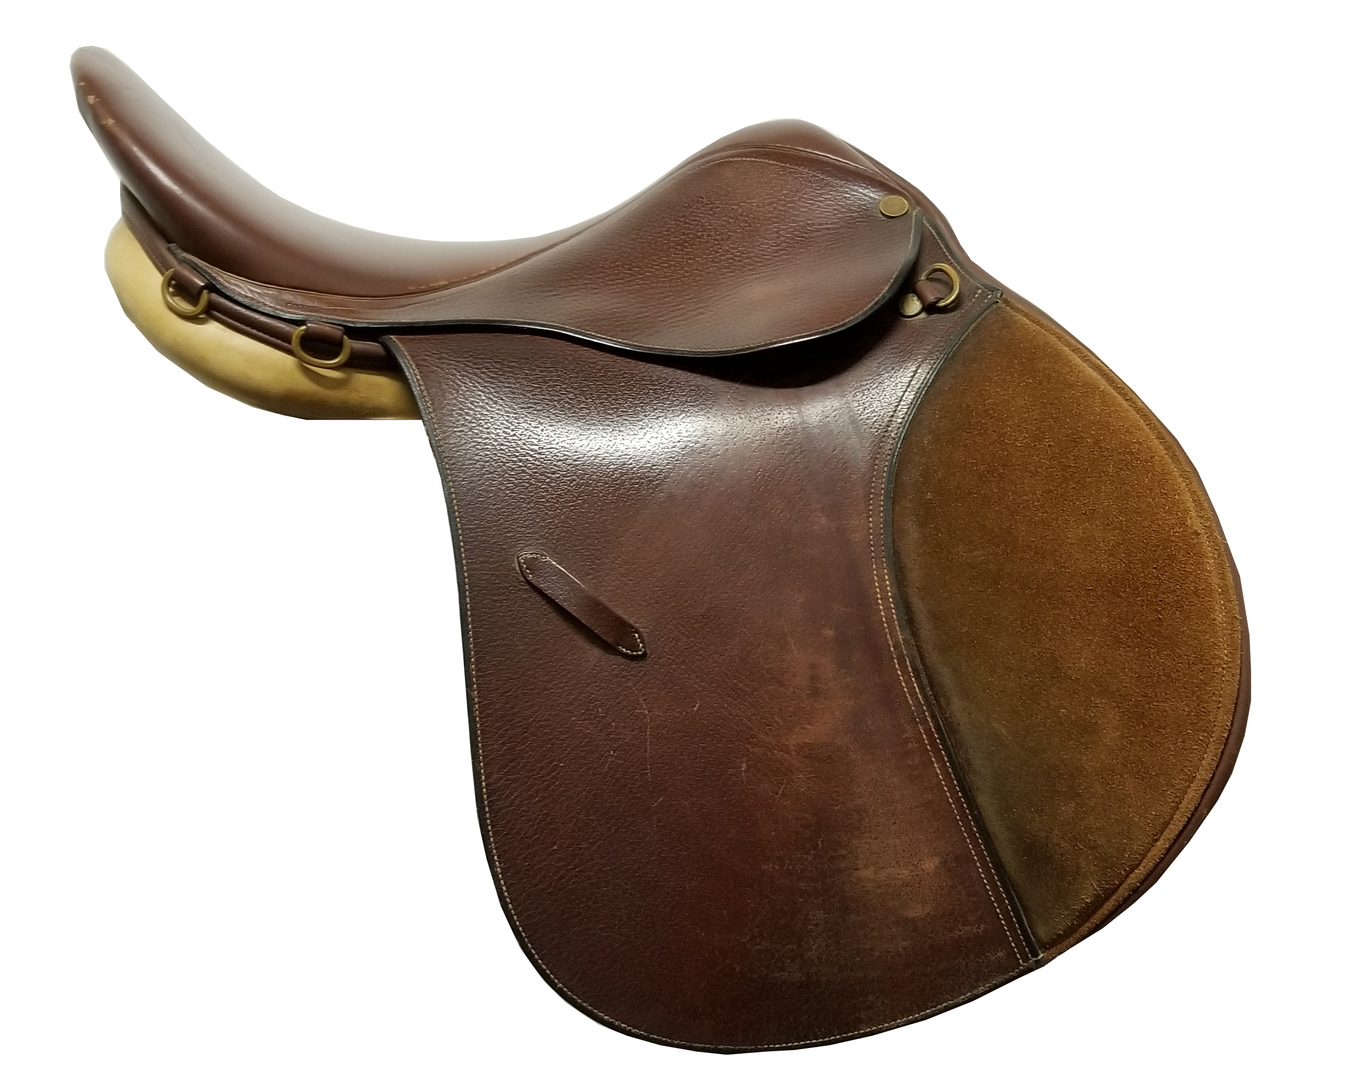 17 Inch All Purpose English Saddle Package All Leather 7" Gullet Hav Brown 